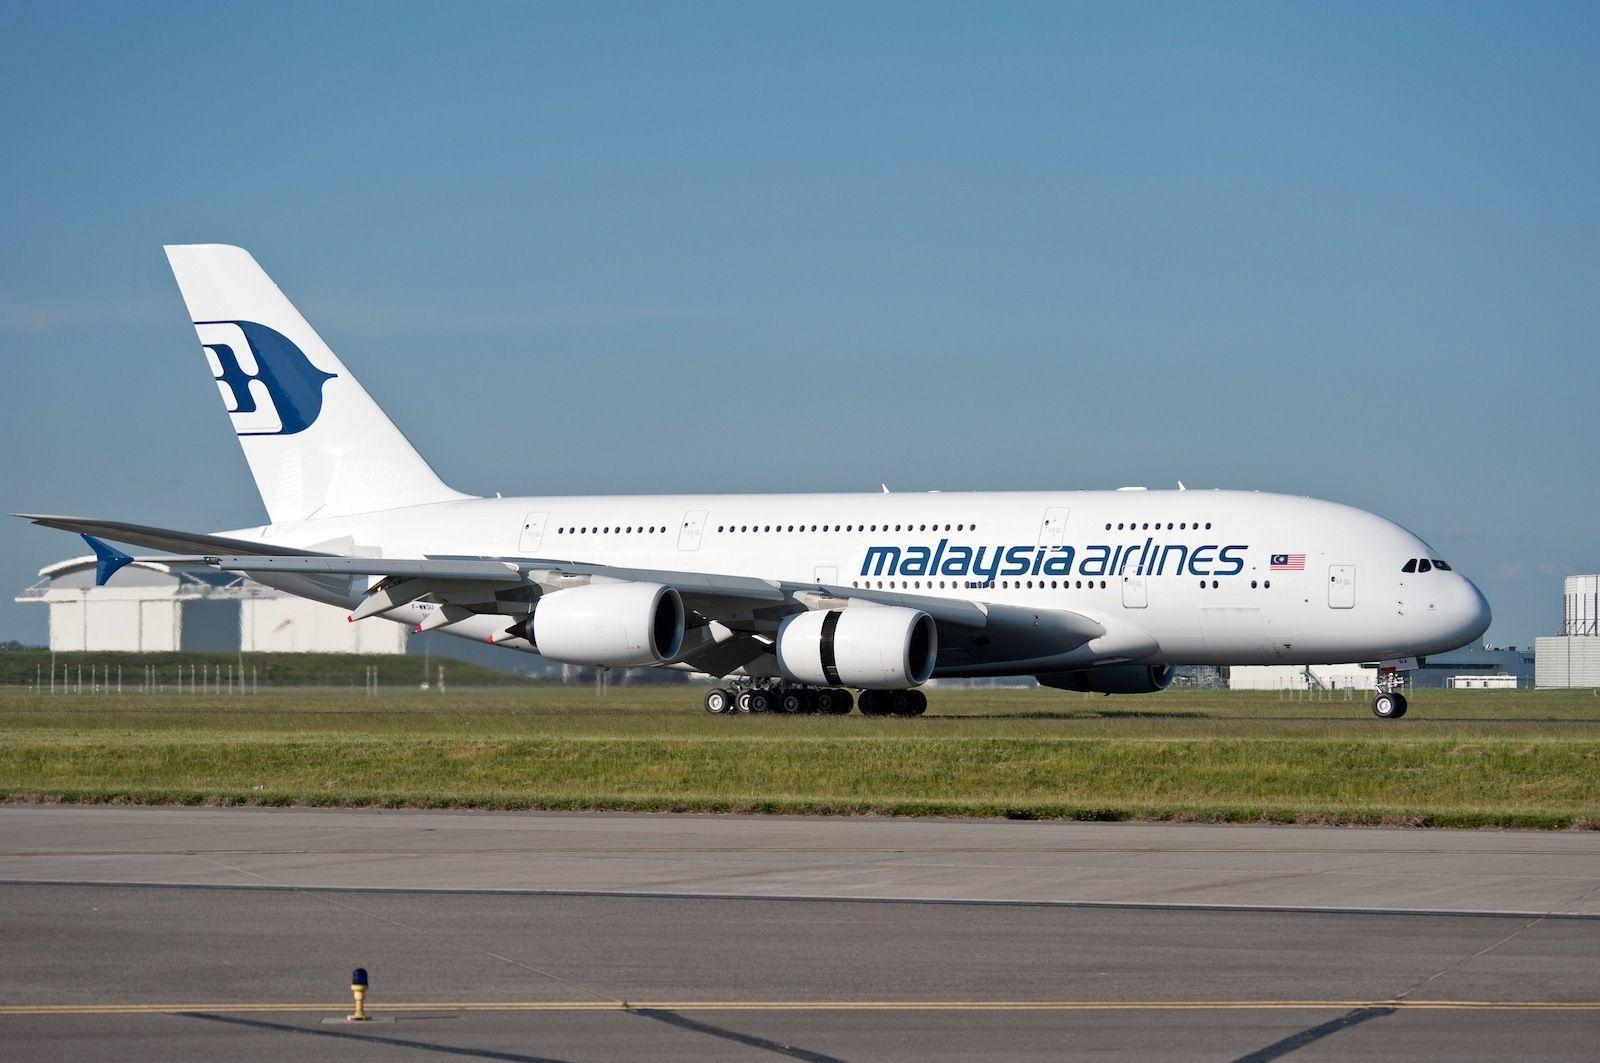 Malaysia Airlines HD Wallpaper Picture. Malaysia Airlines